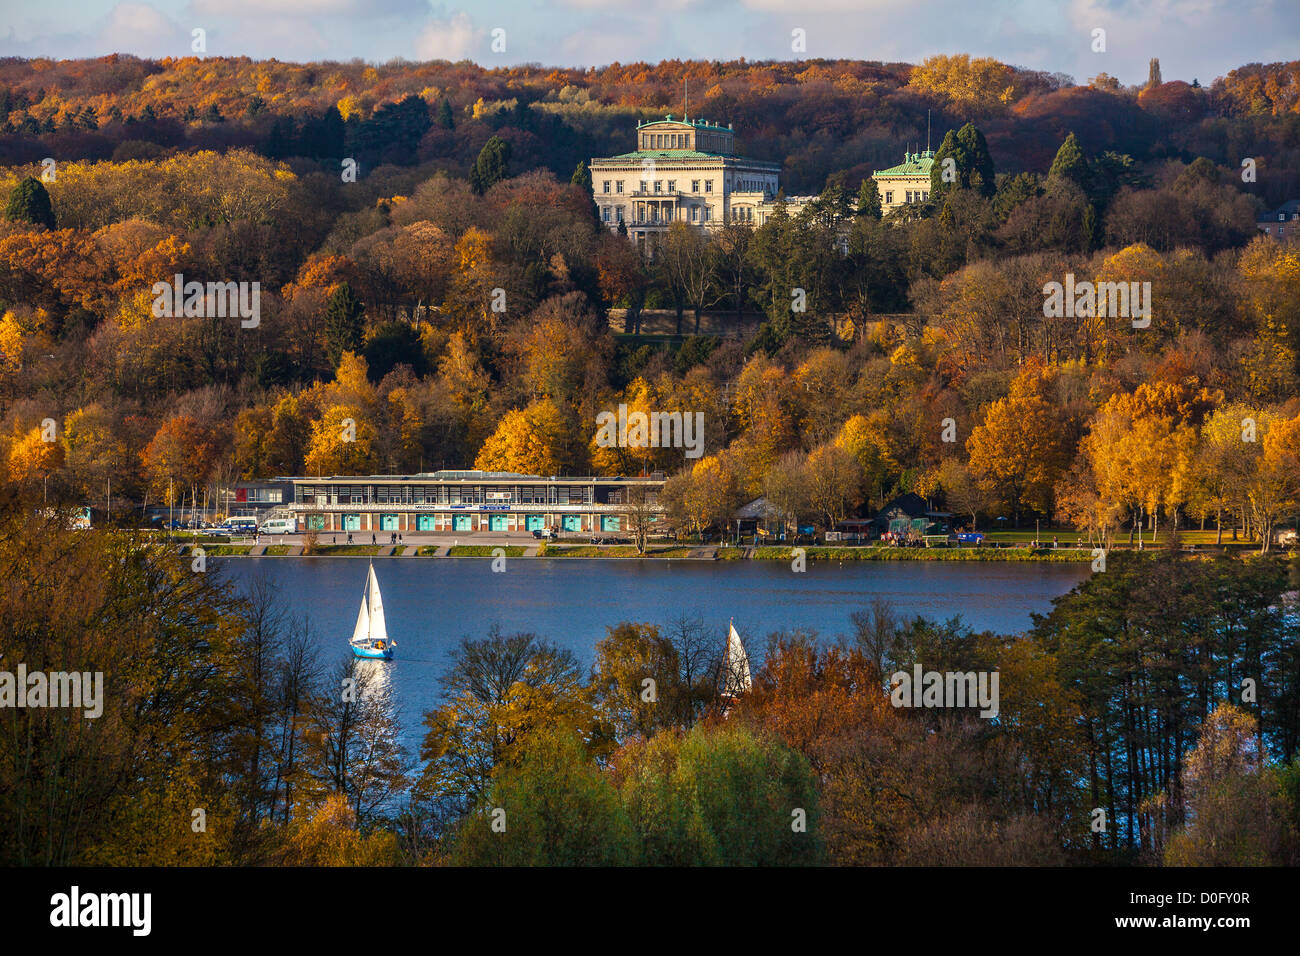 Baldeneysee Lake in Essen, Germany.View in autumn to Villa Huegel, the family ancestral home of Krupp industrial dynasty. Stock Photo